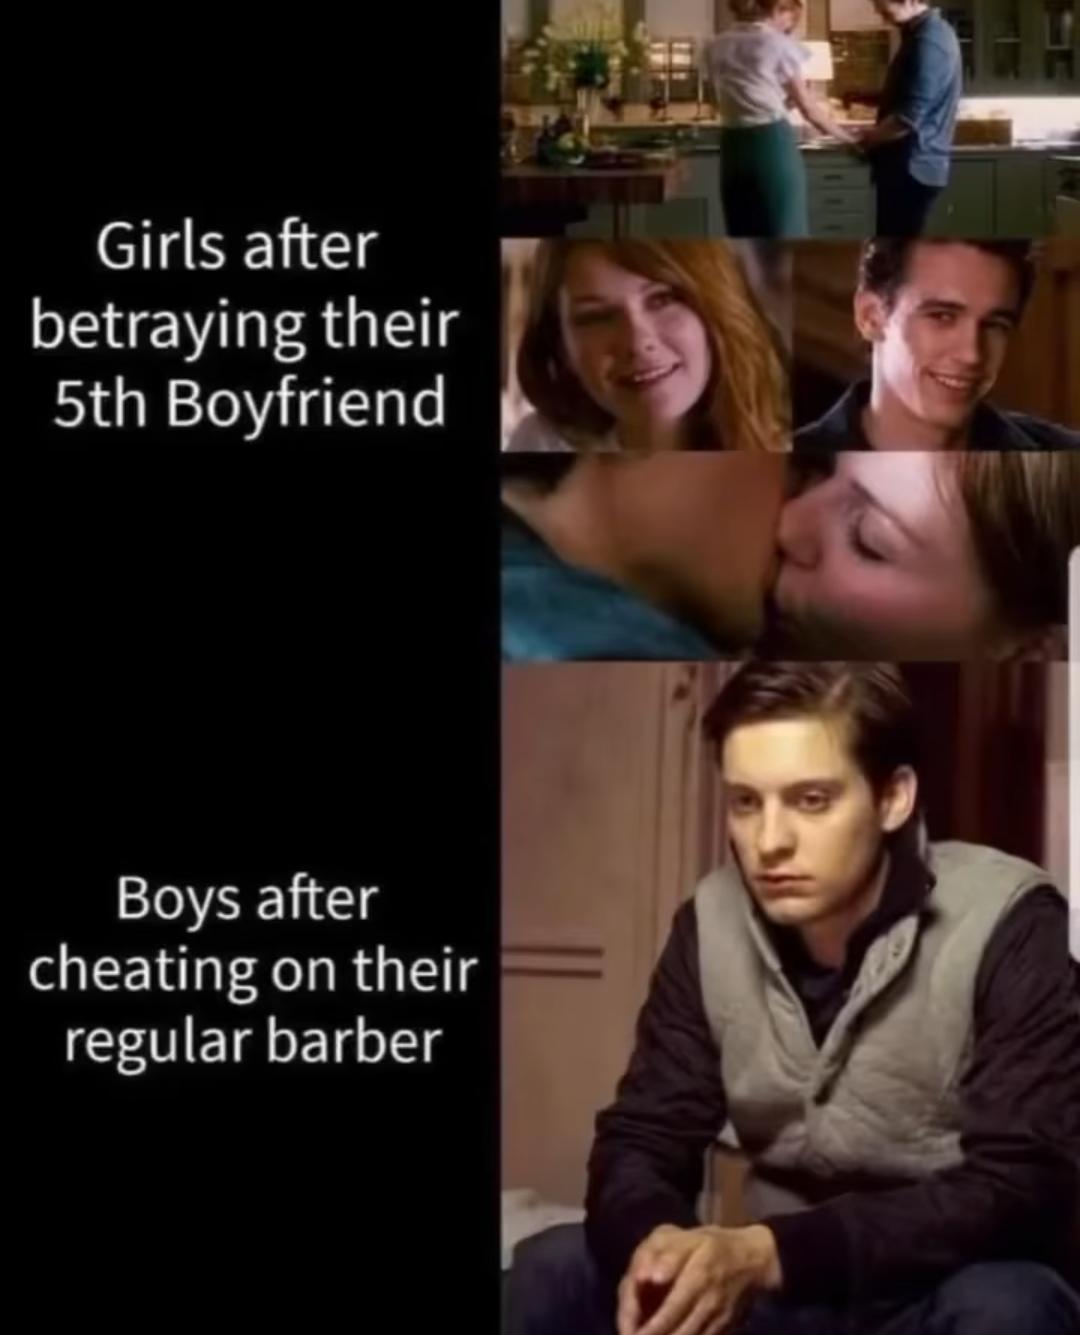 funny memes - dank memes - photo caption - Girls after betraying their 5th Boyfriend Boys after cheating on their regular barber